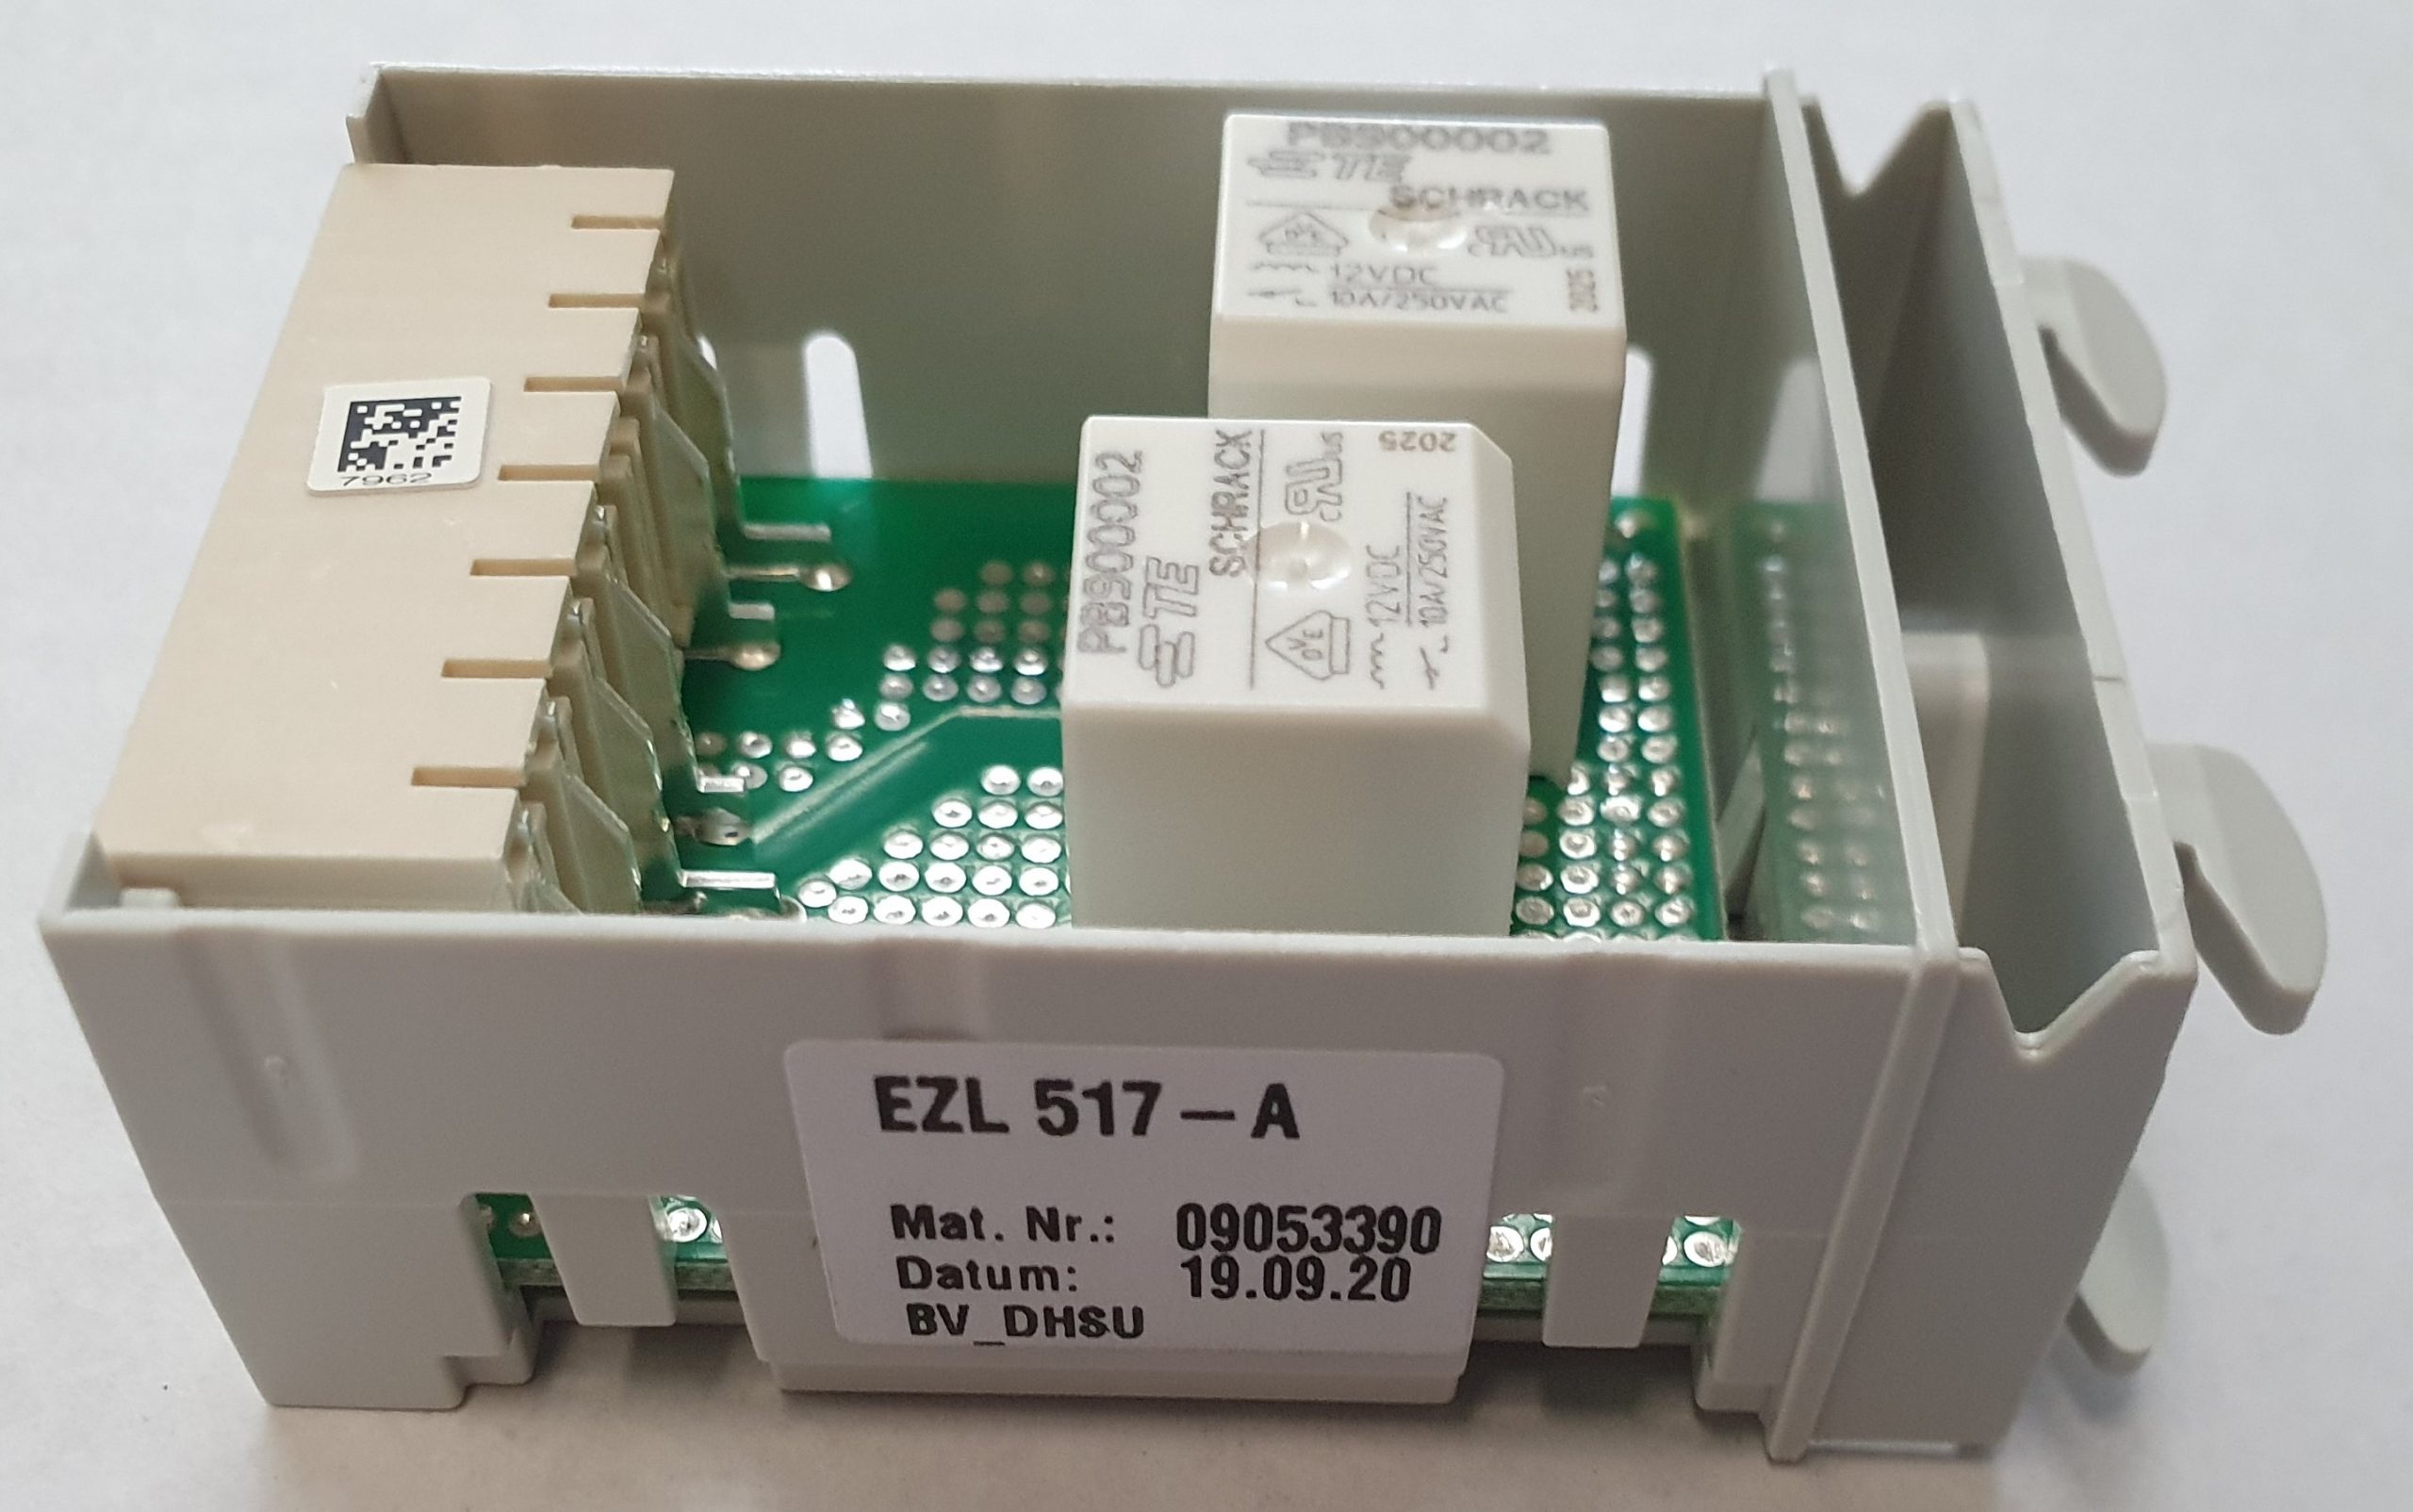 DISHWASHER MIELE HEATING RELAY PCB 9053390,09053390 Modules for the electronic board of the dishwasher